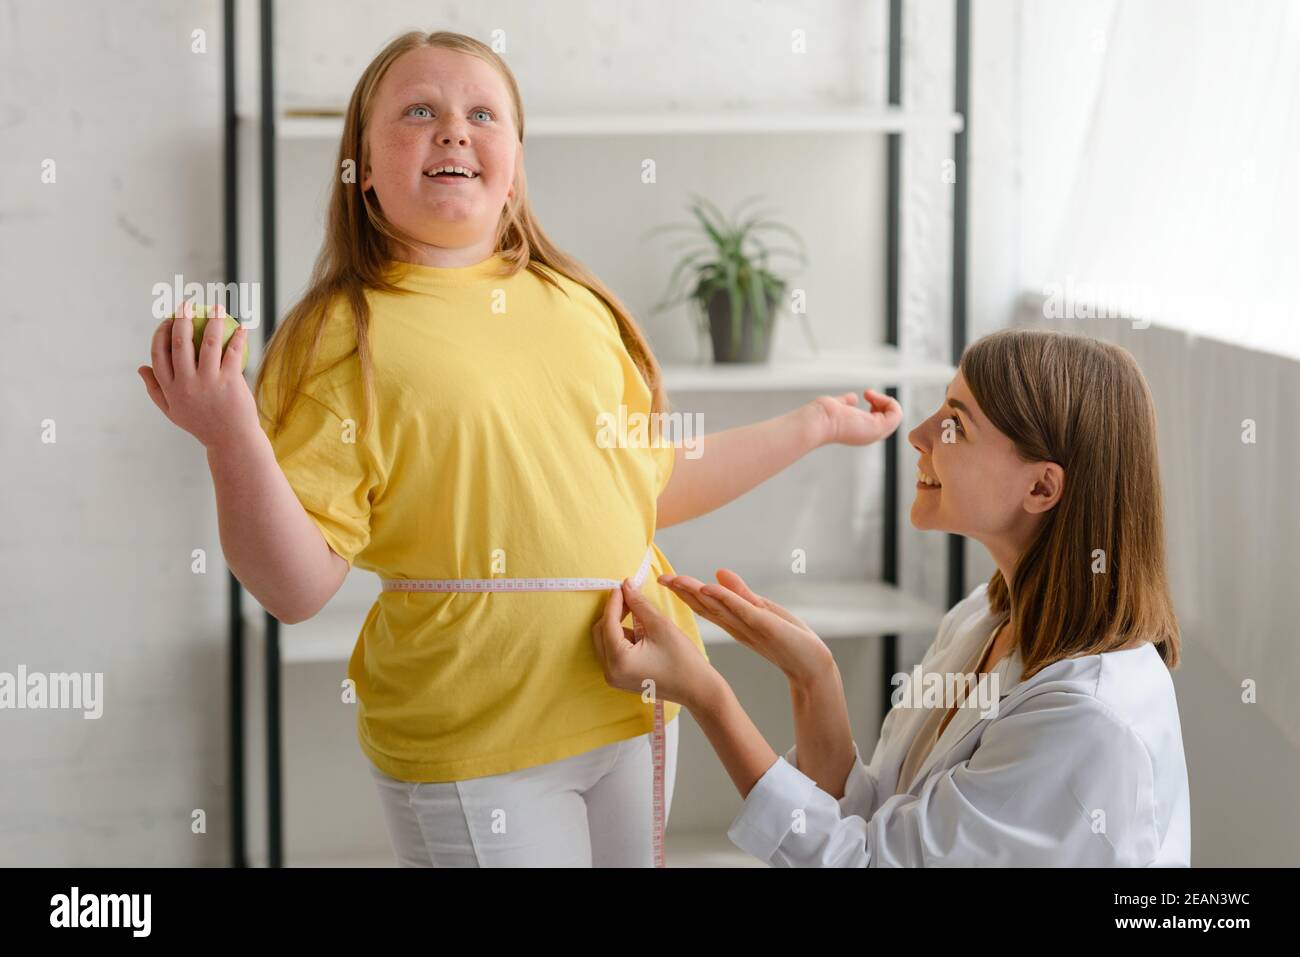 Girl's waist being measured by a nutritionist Stock Photo